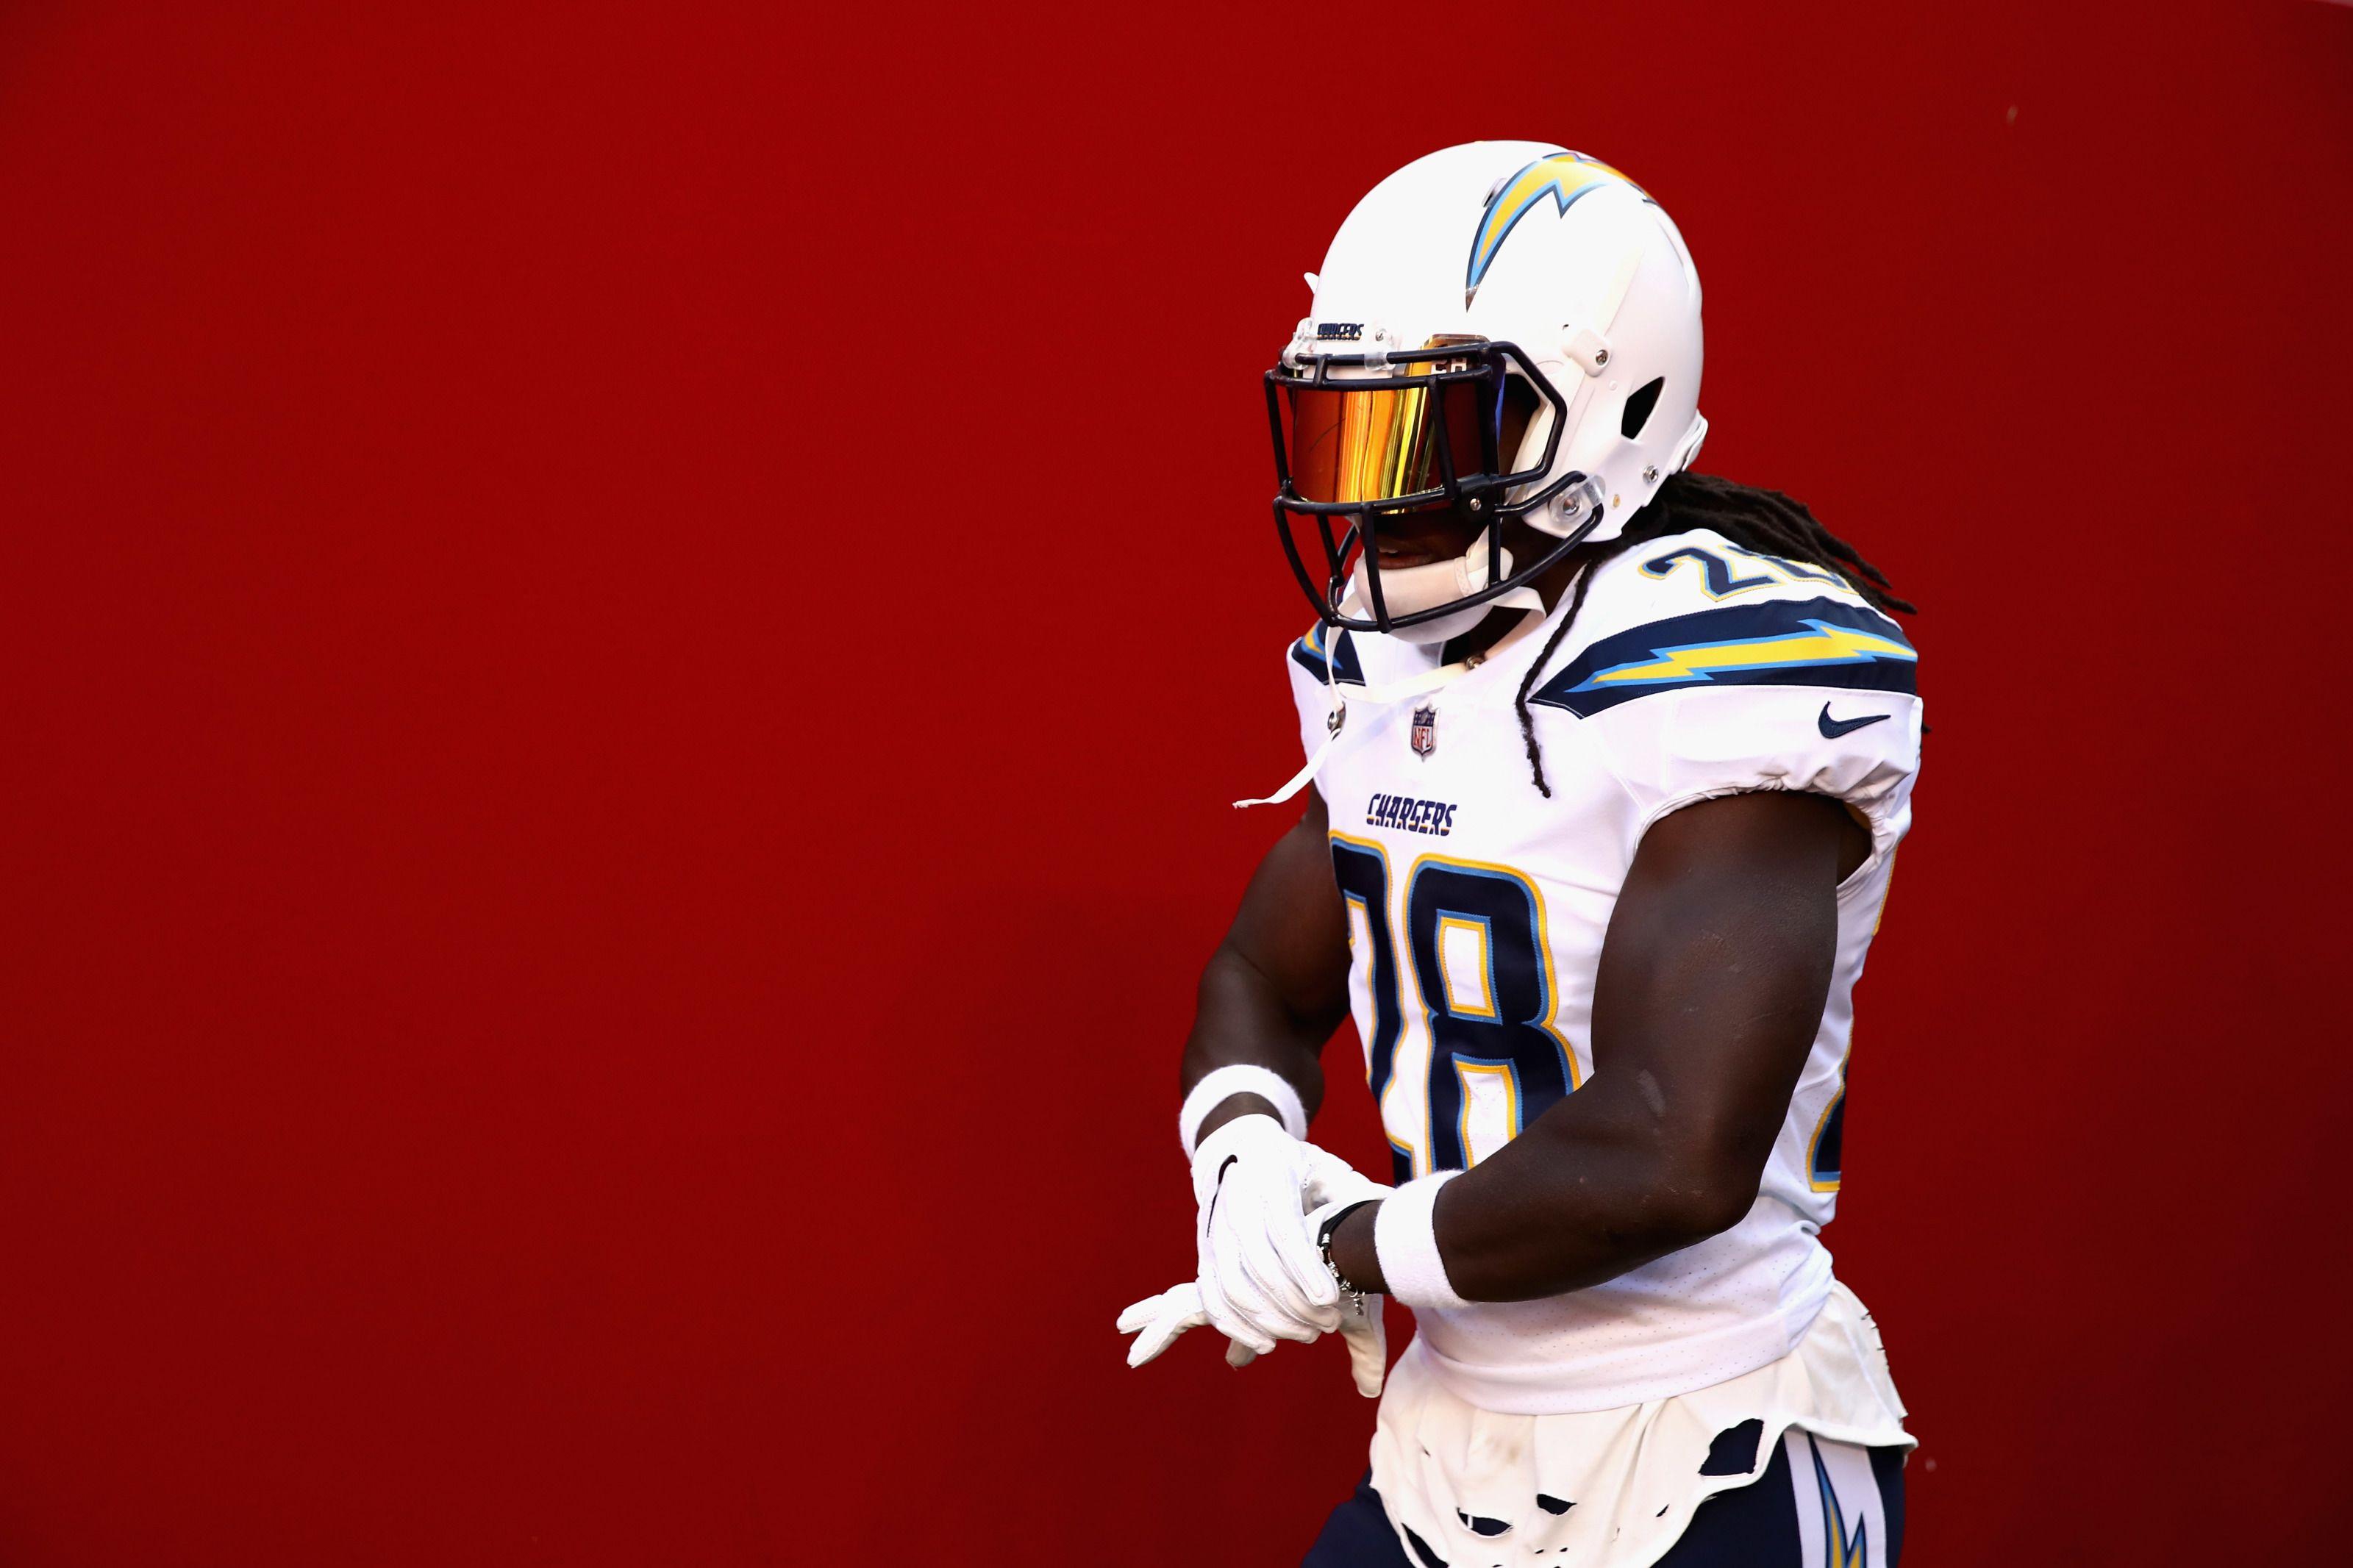 Melvin Gordon: The one factor no one has considered